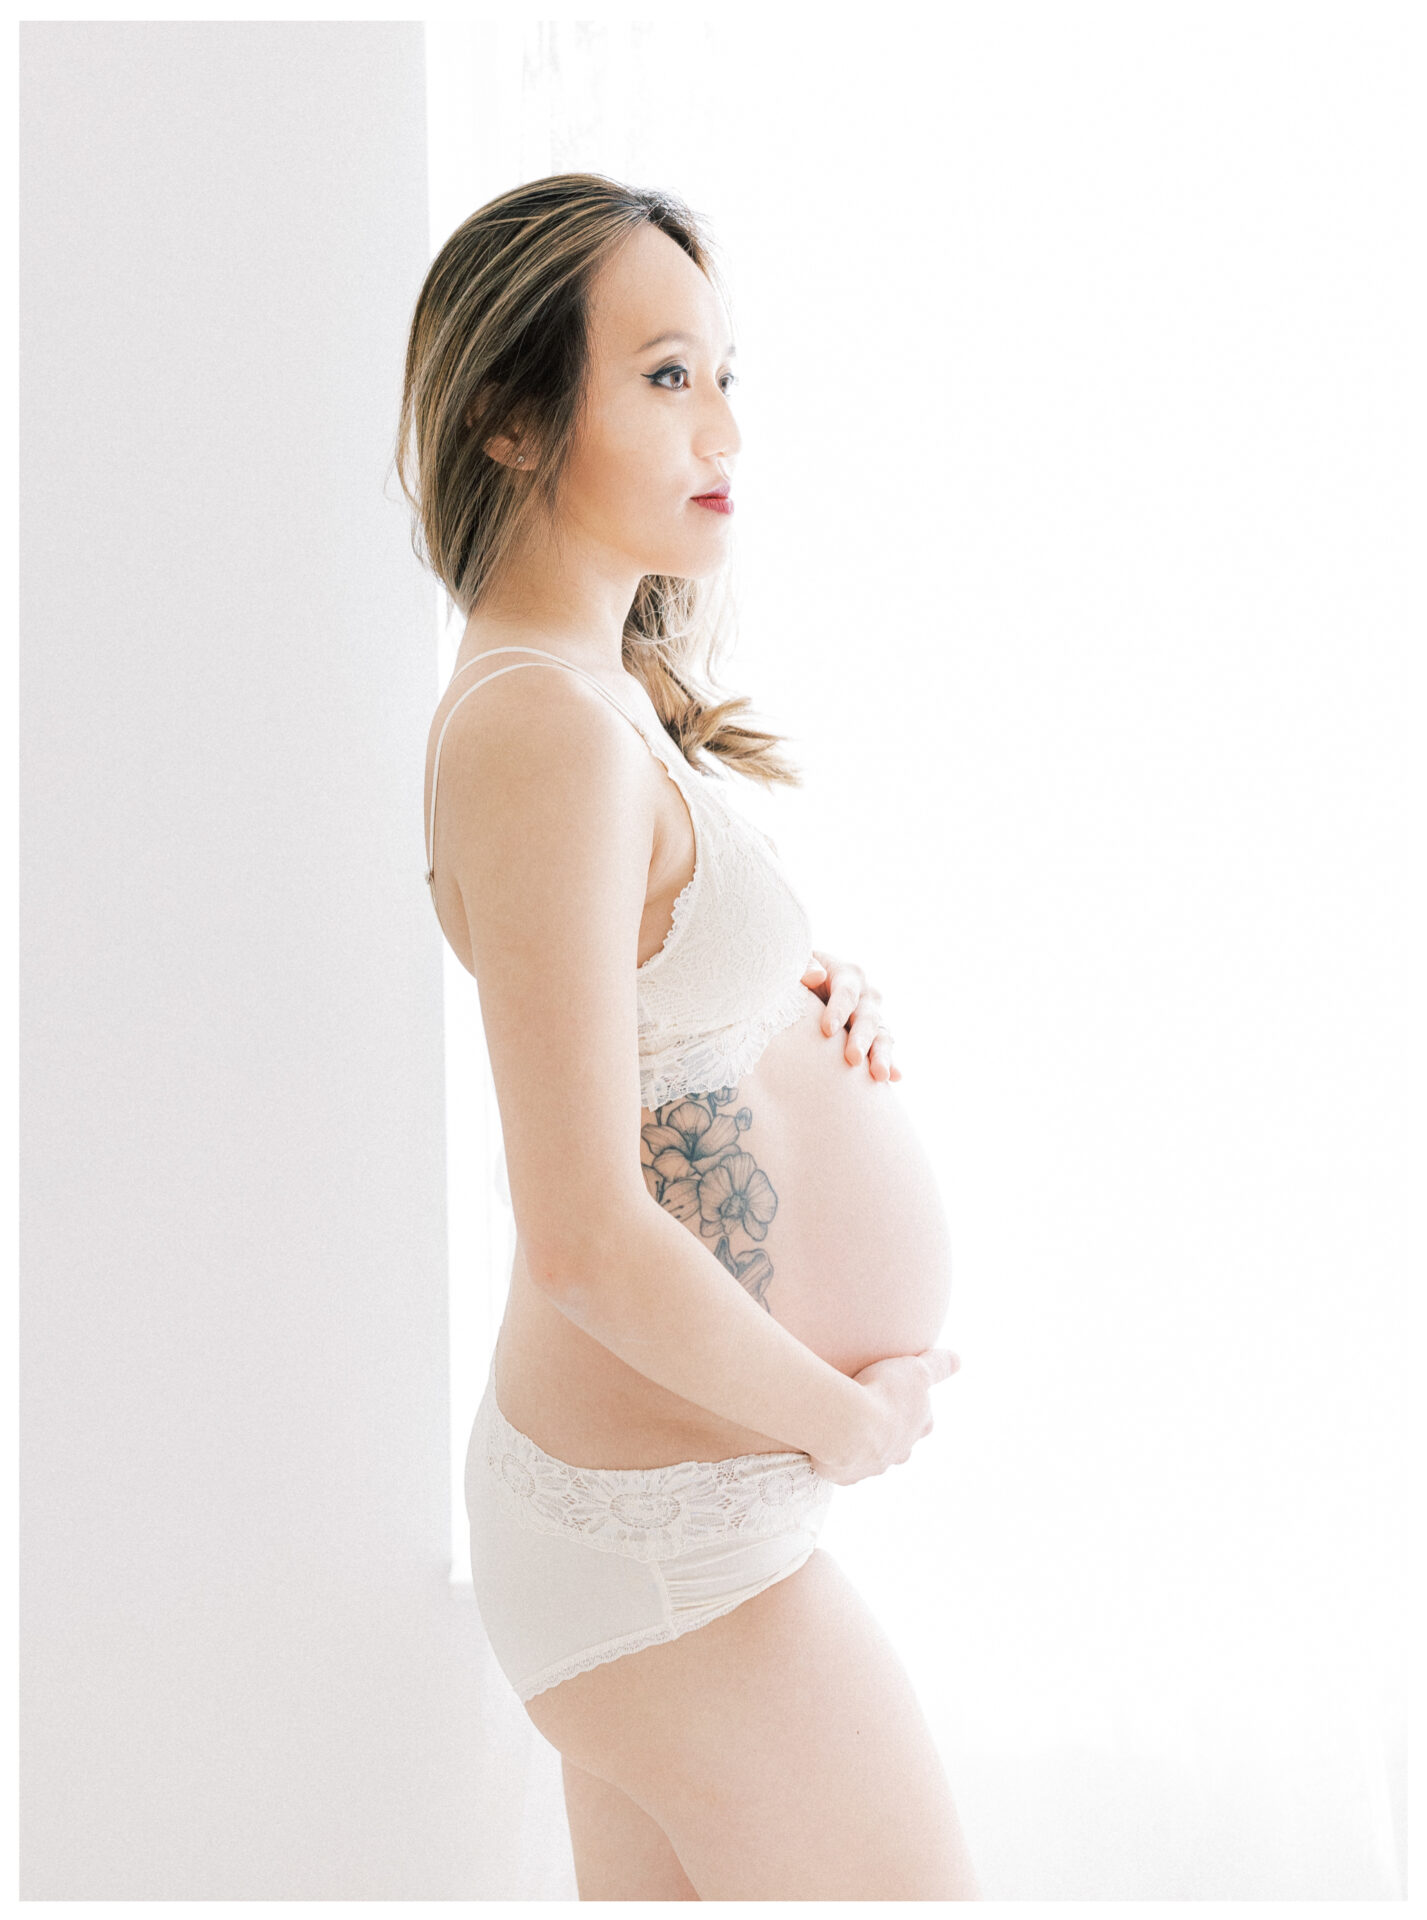 Winter Freire Photography | Fine Art Maternity Boudoir | Expecting mother standing in natural window light